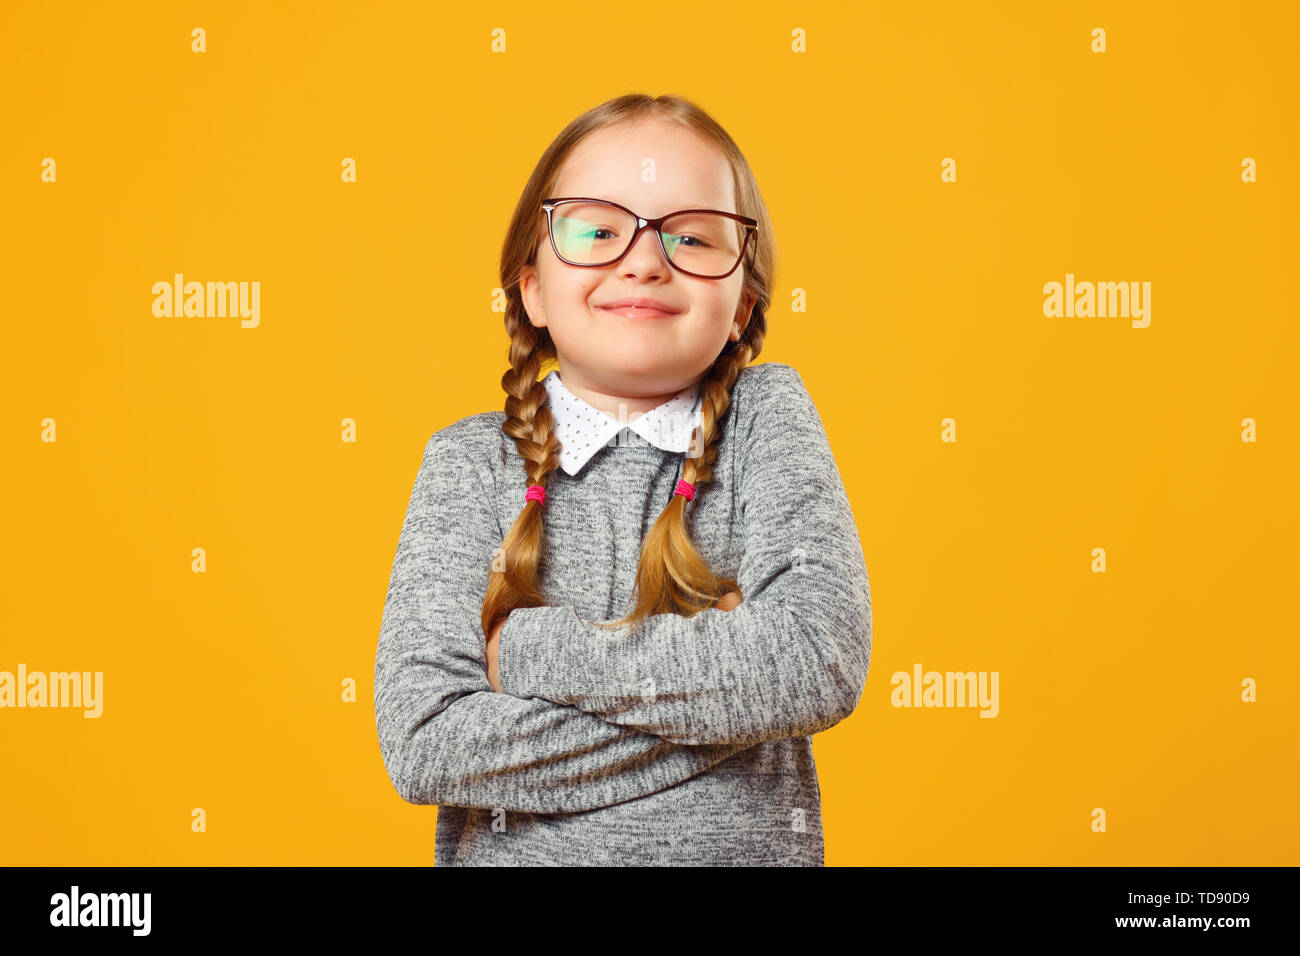 Closeup portrait of a cheerful little girl in glasses on yellow background. Child schoolgirl folded her arms and looks into the camera. Stock Photo